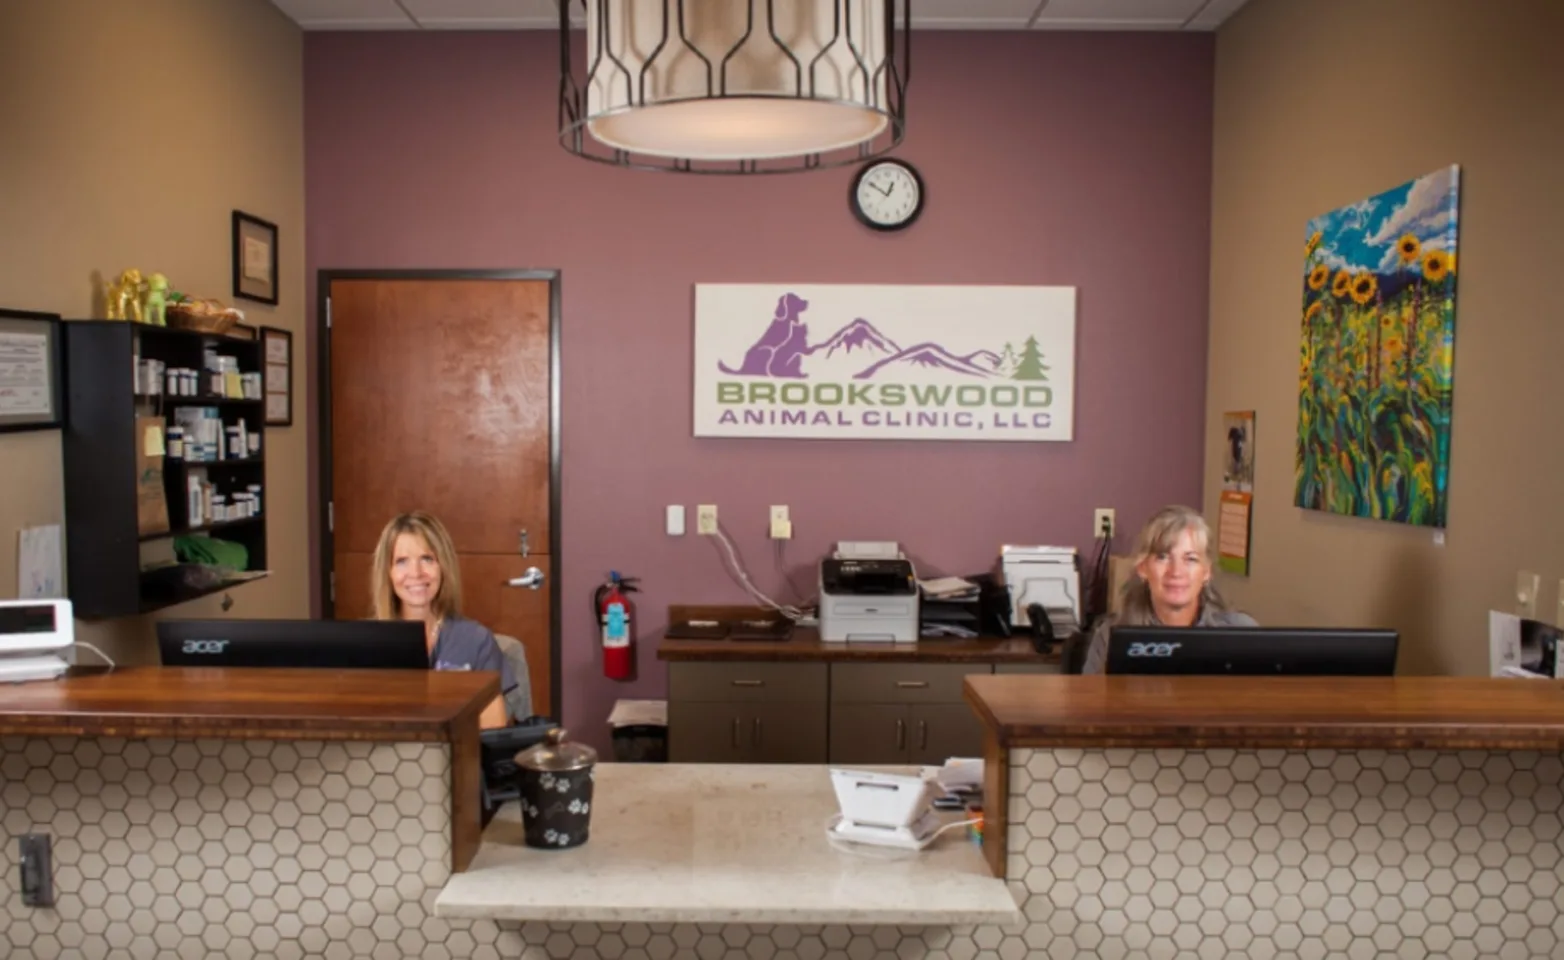 Two receptionists at the front desk of Brookwood Animal Clinic